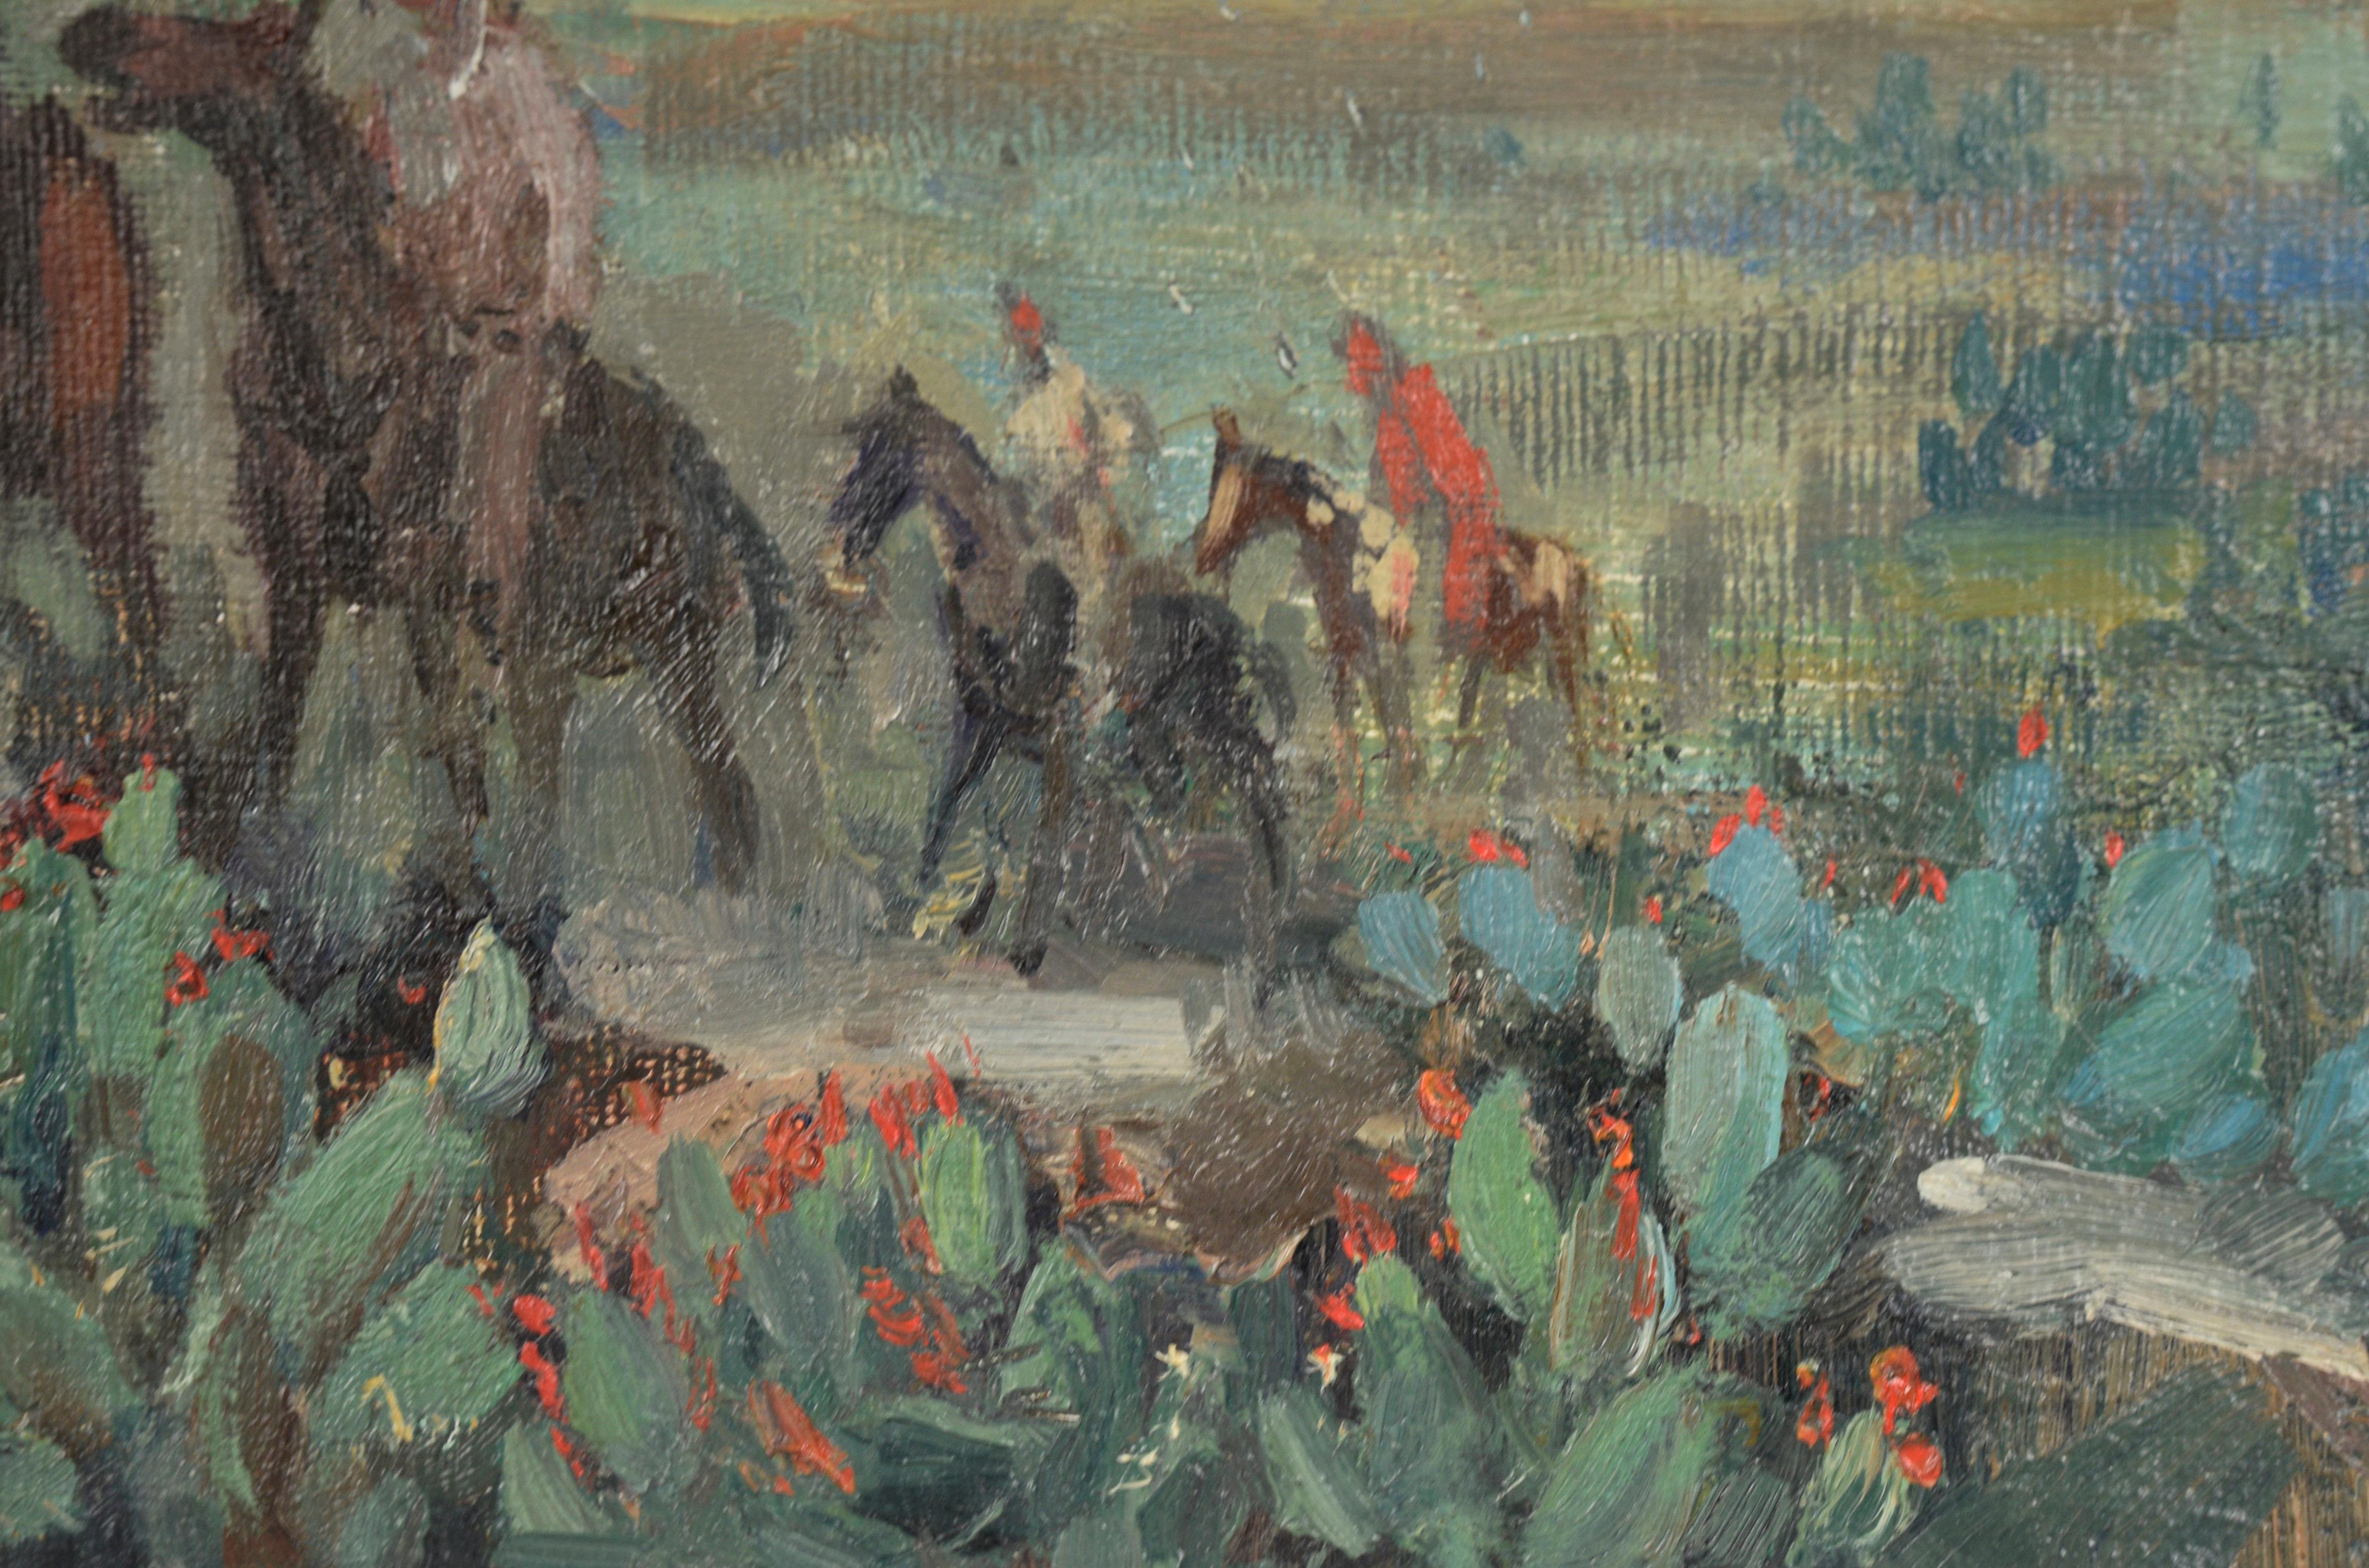 Bold desert scene with Apaches on horseback by Marco Antonio Gomez (Mexican, 1910-1972). Three riders pause at the top of a hill with several riders trailing behind them. The desert stretches into the distance behind them, terminating in a range of